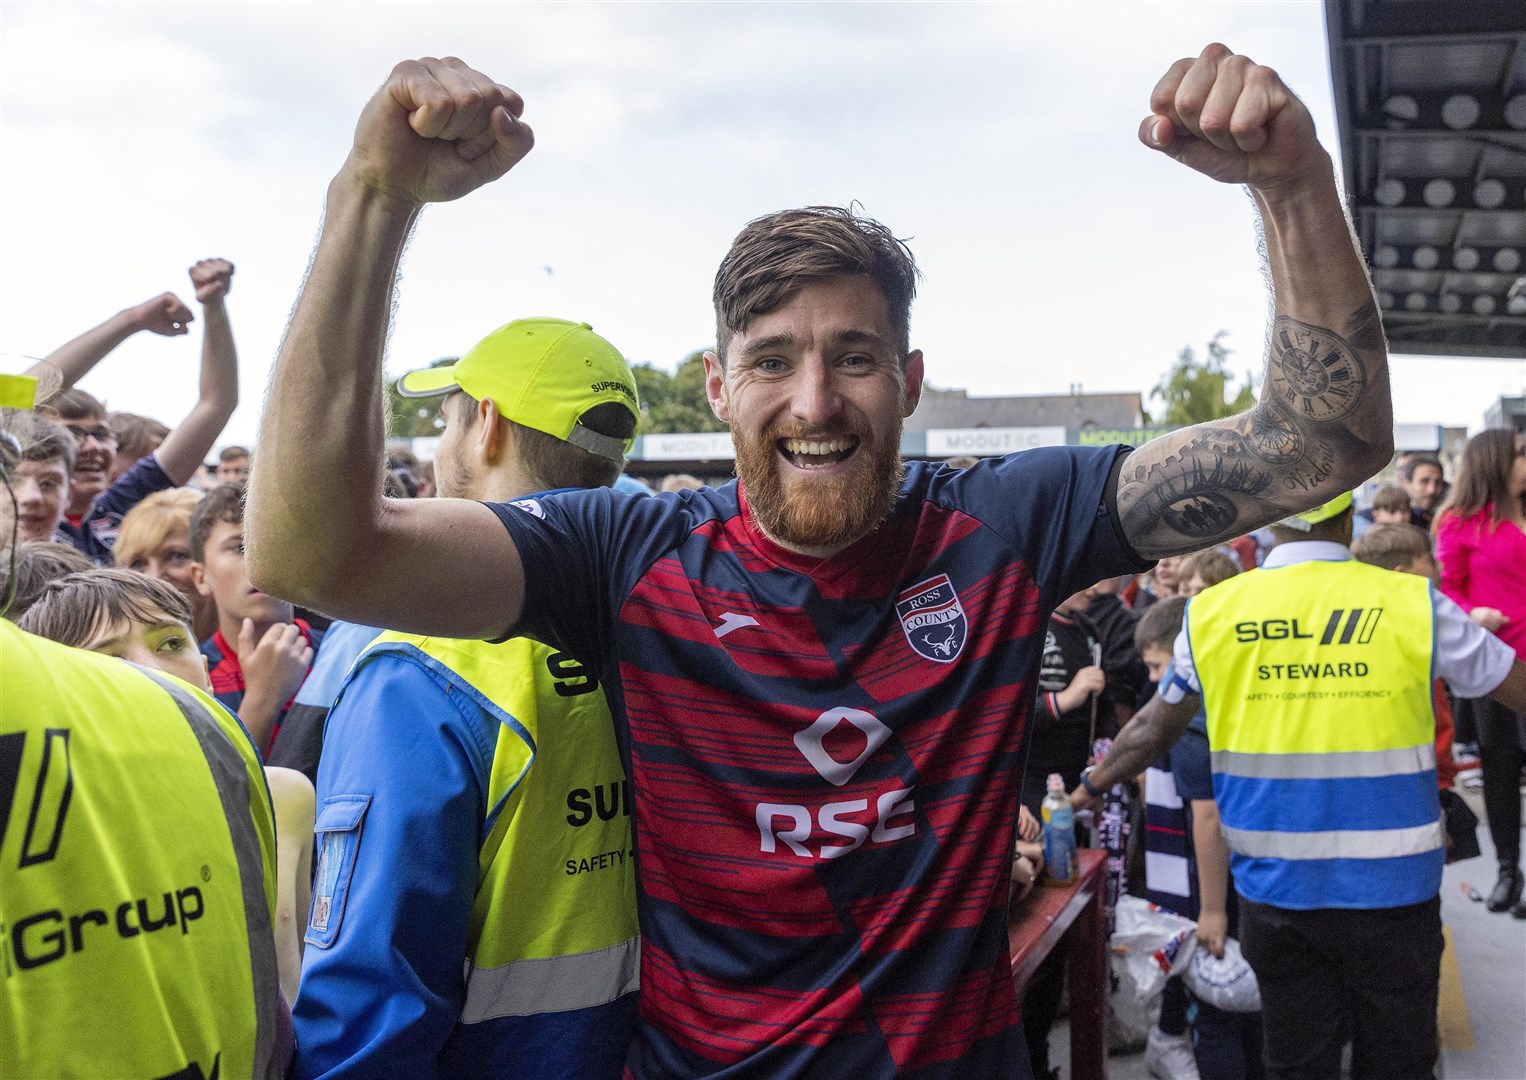 Ross County celebrations after their win to keep them in the Premiership. Big celebrations at the end from club captain Jack Baldwin.